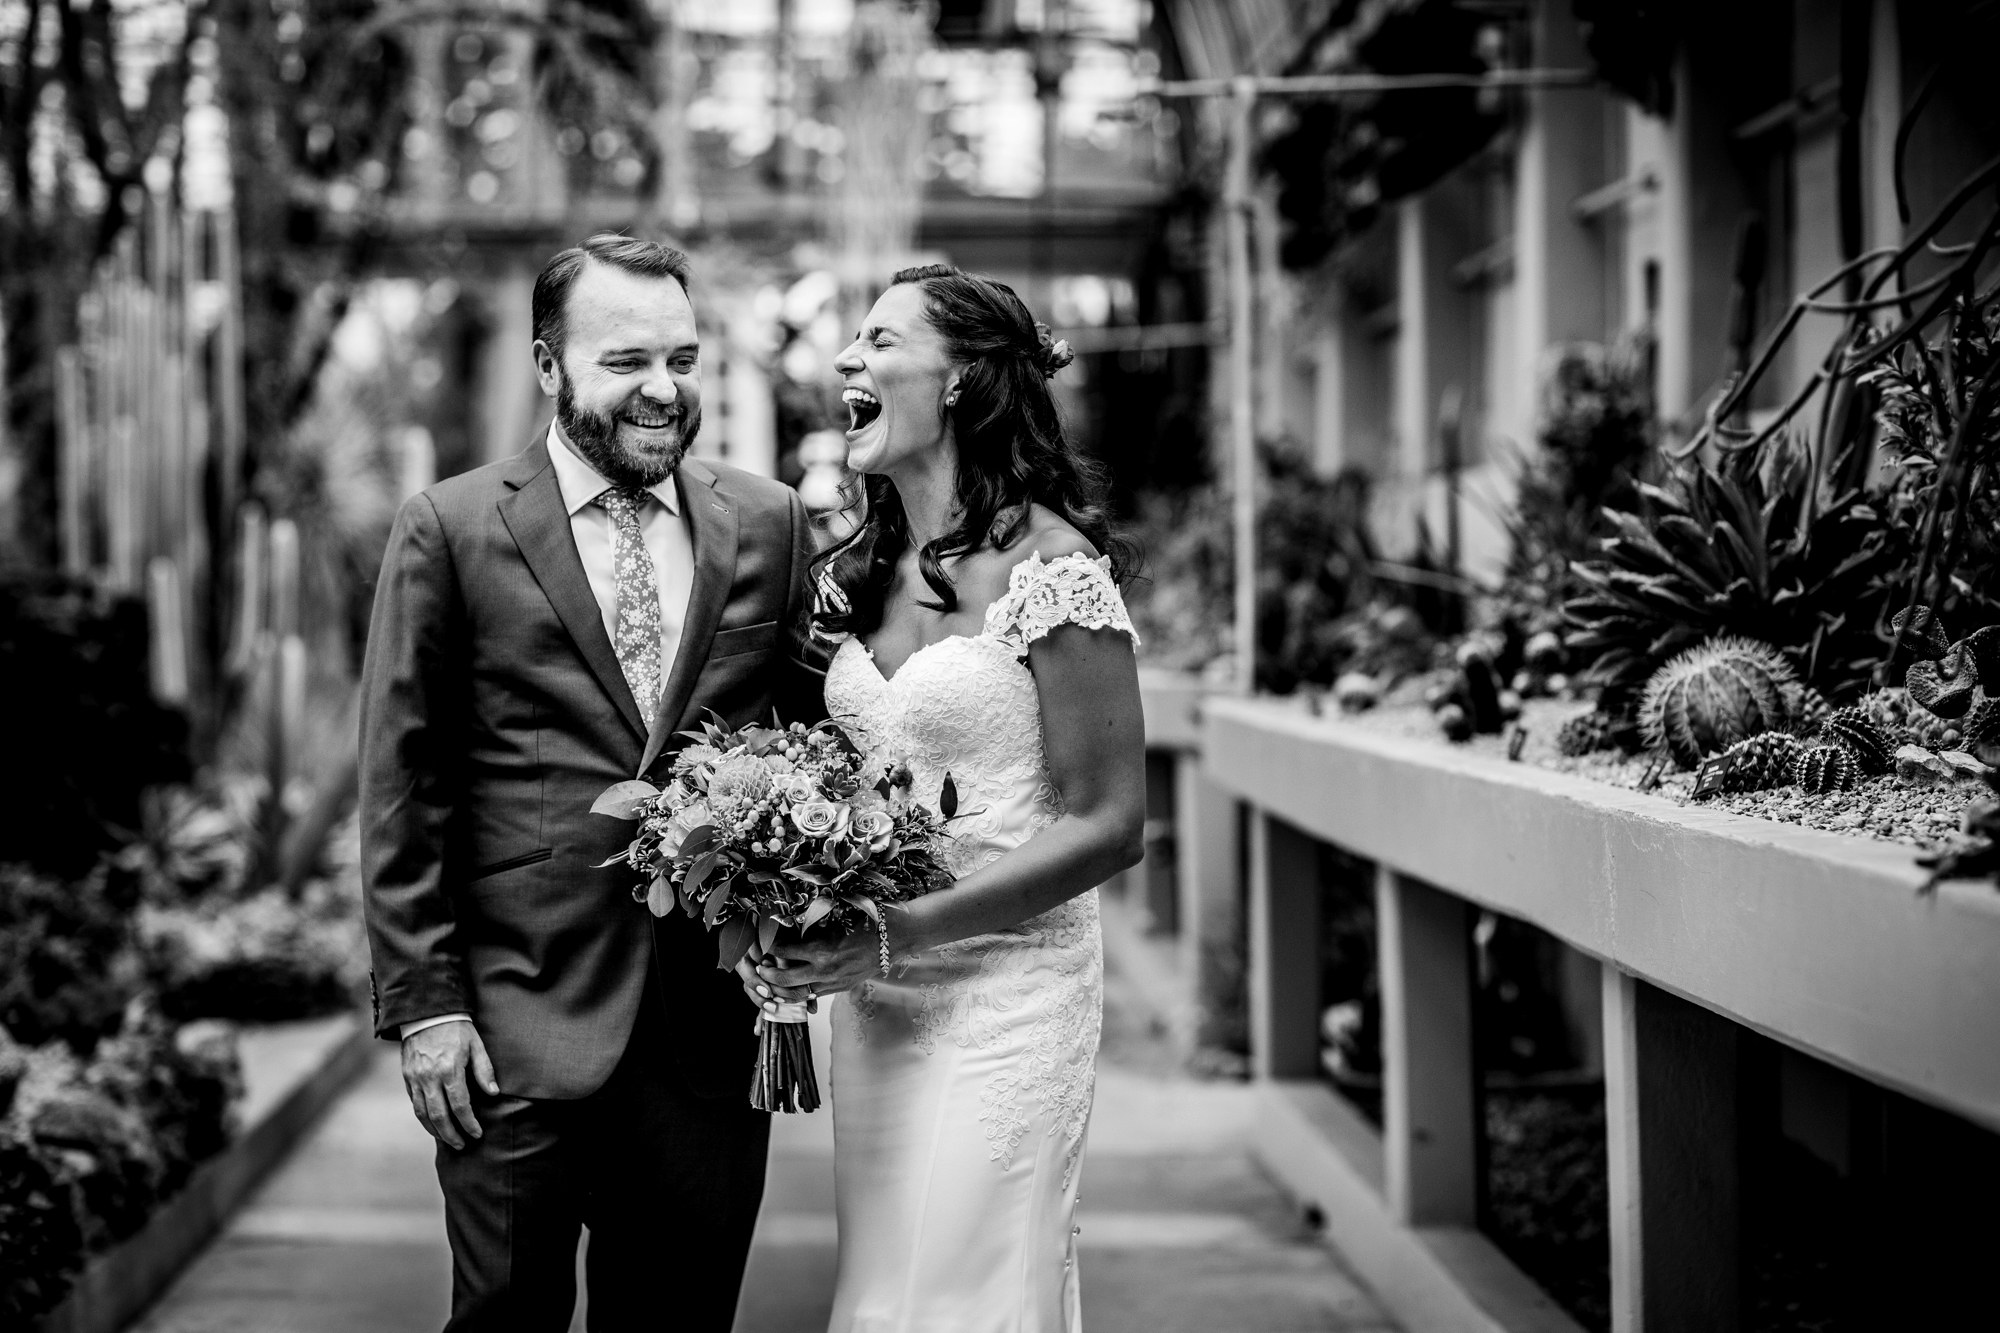 A wedding portrait at the Garfield Park Conservatory